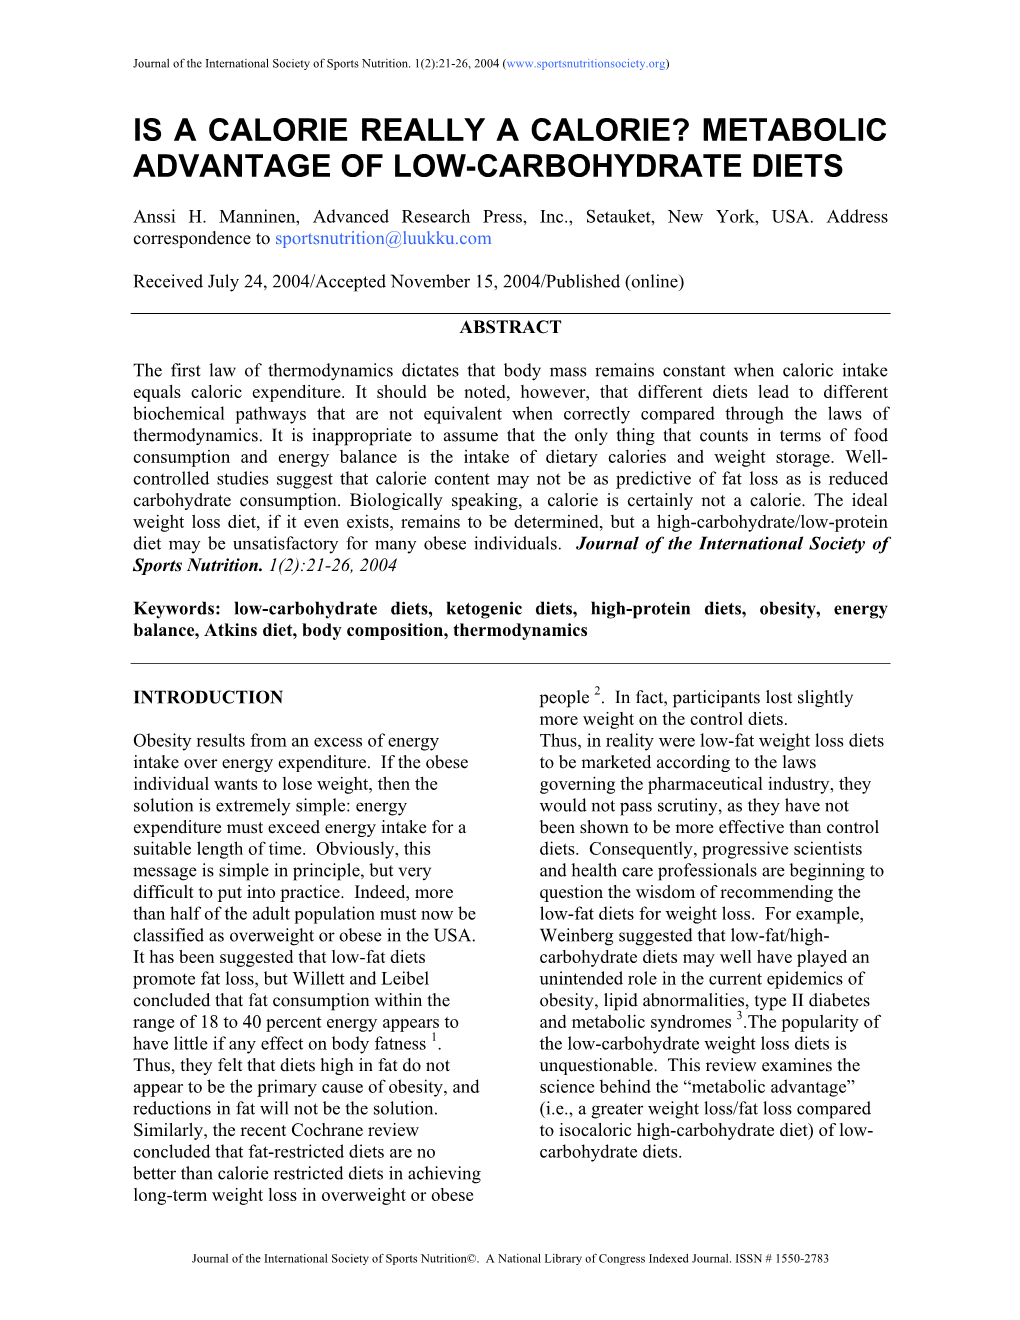 Metabolic Advantage of Low-Carbohydrate Diets